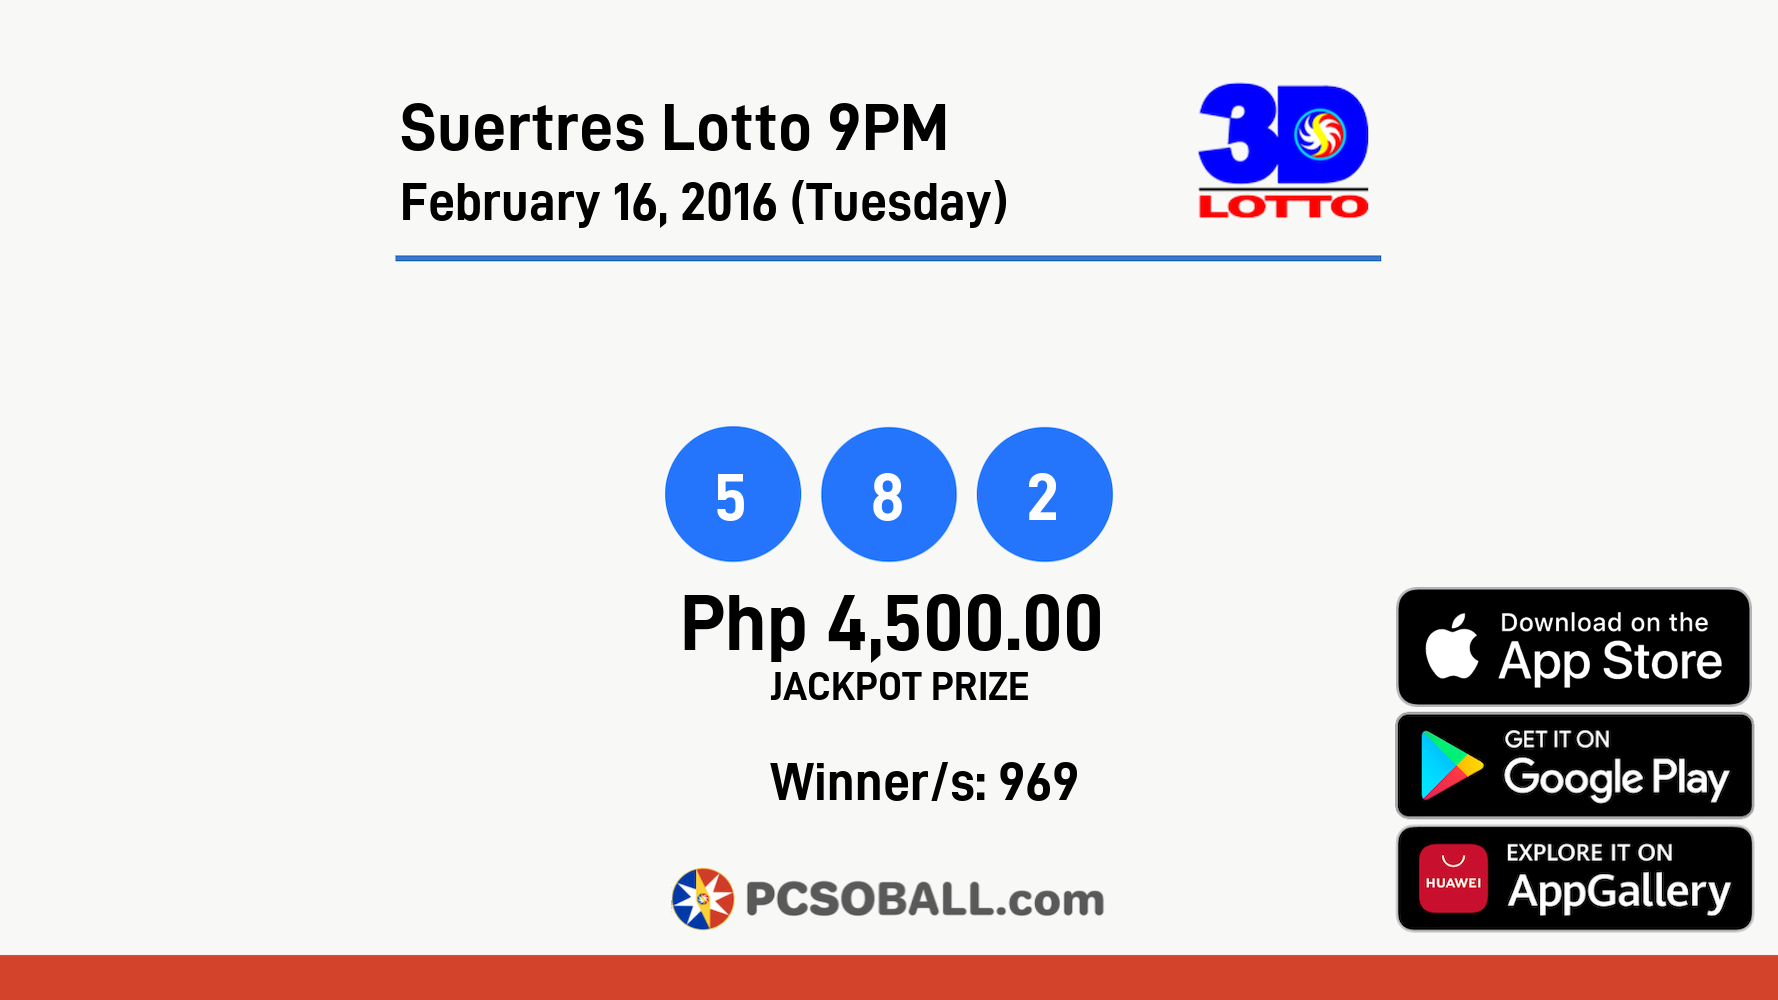 Suertres Lotto 9PM February 16, 2016 (Tuesday) Result